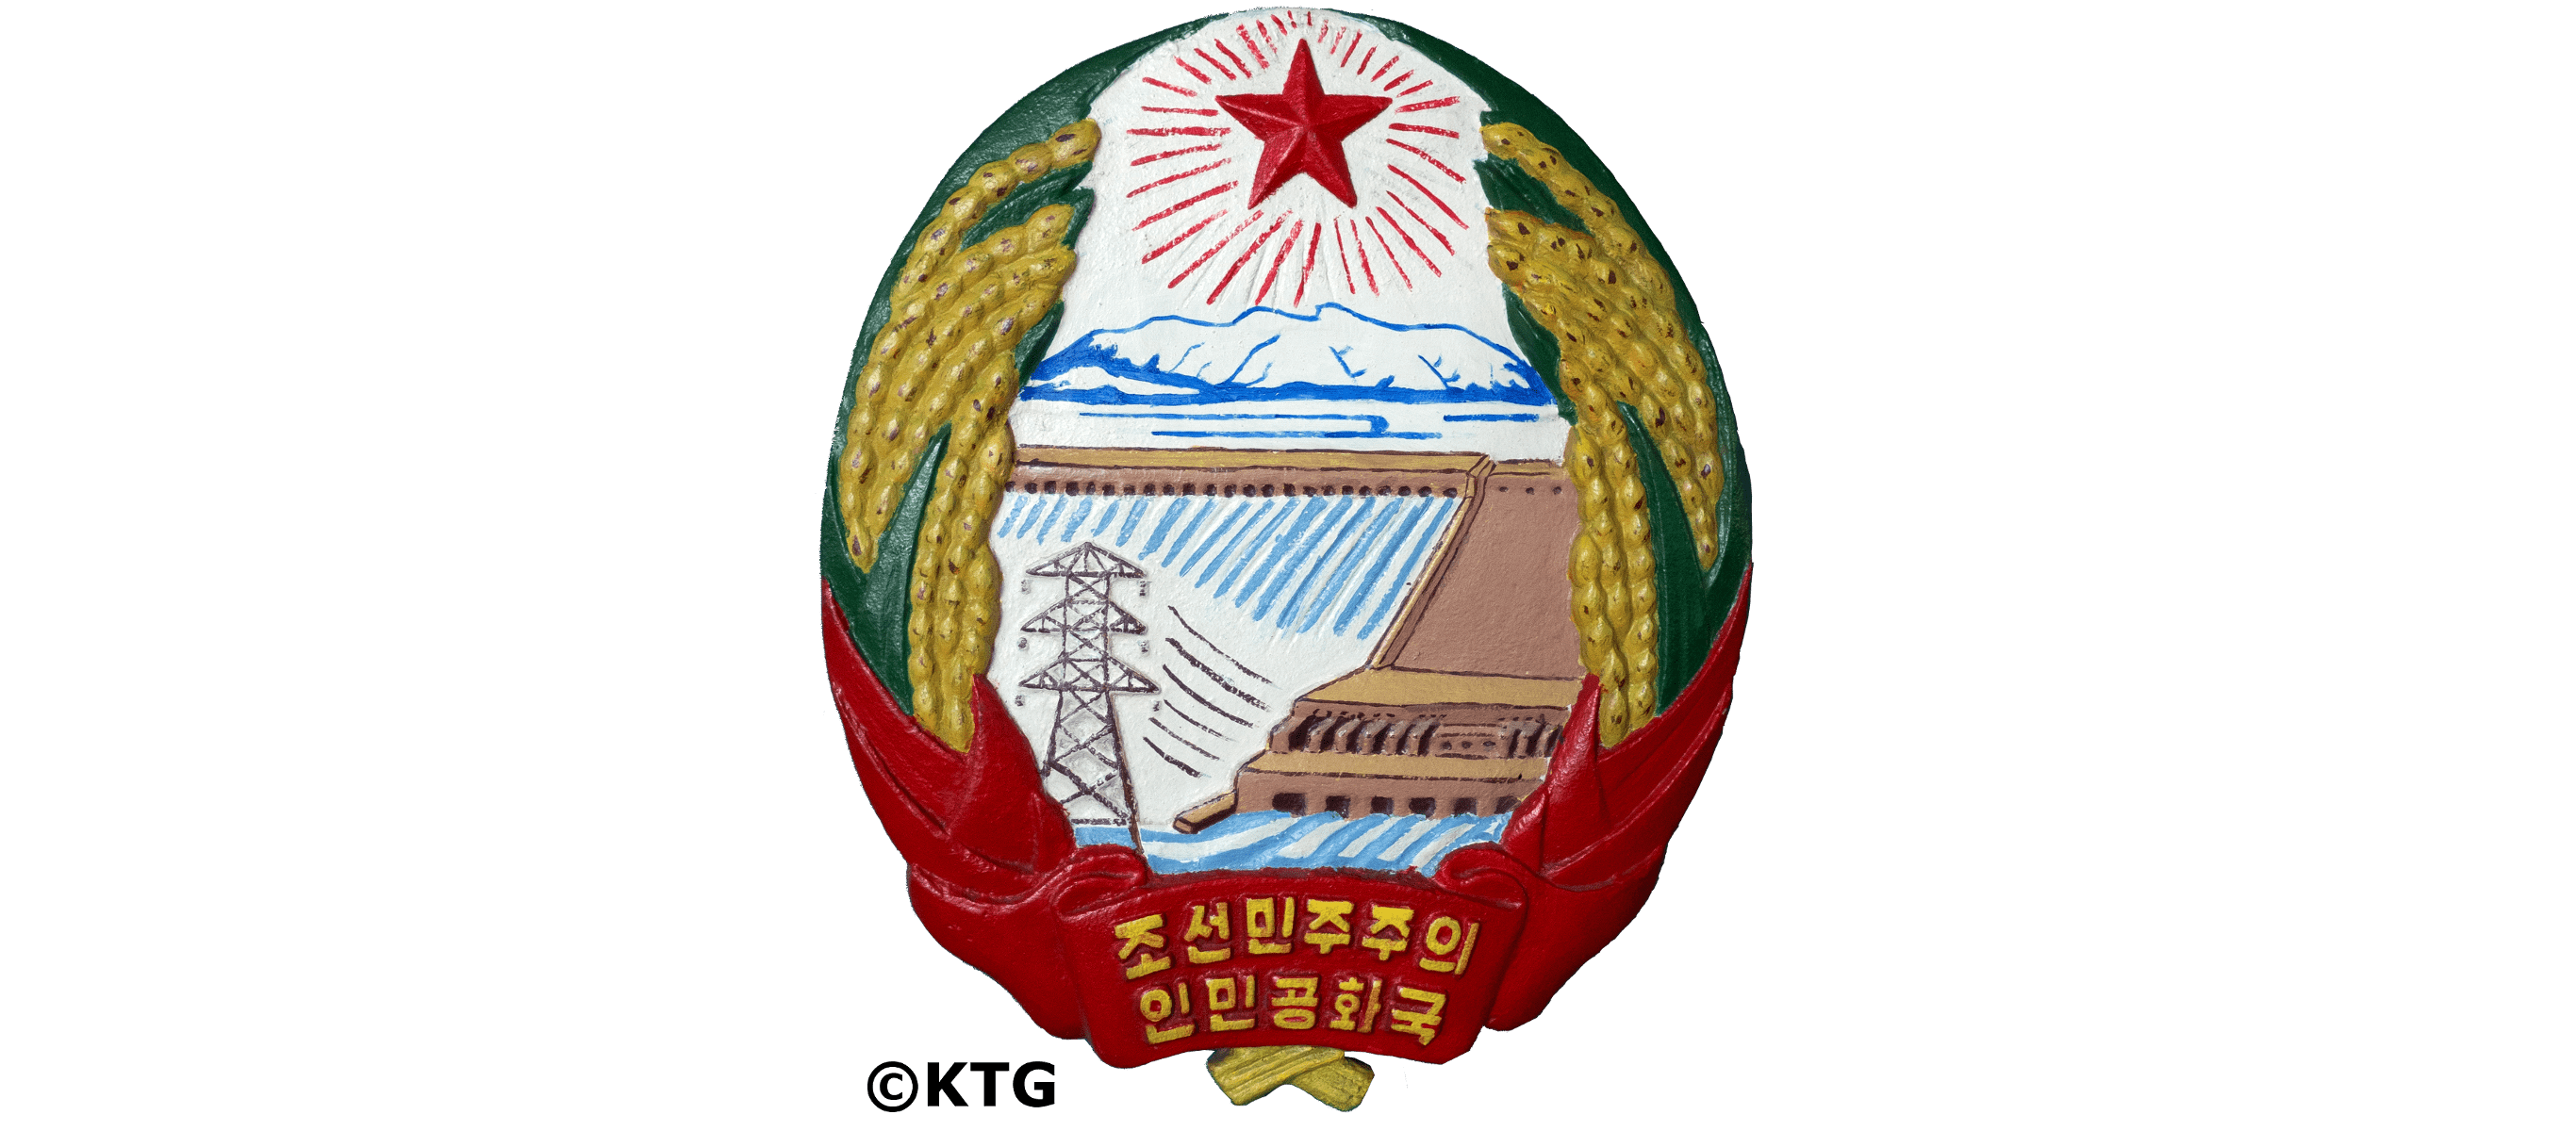 DPRK Natonional Emblem. The National Emblem of North Korea consists of a red star, Mount Paekdu, a dam, electric towers and cornfields. Picture taken by KTG